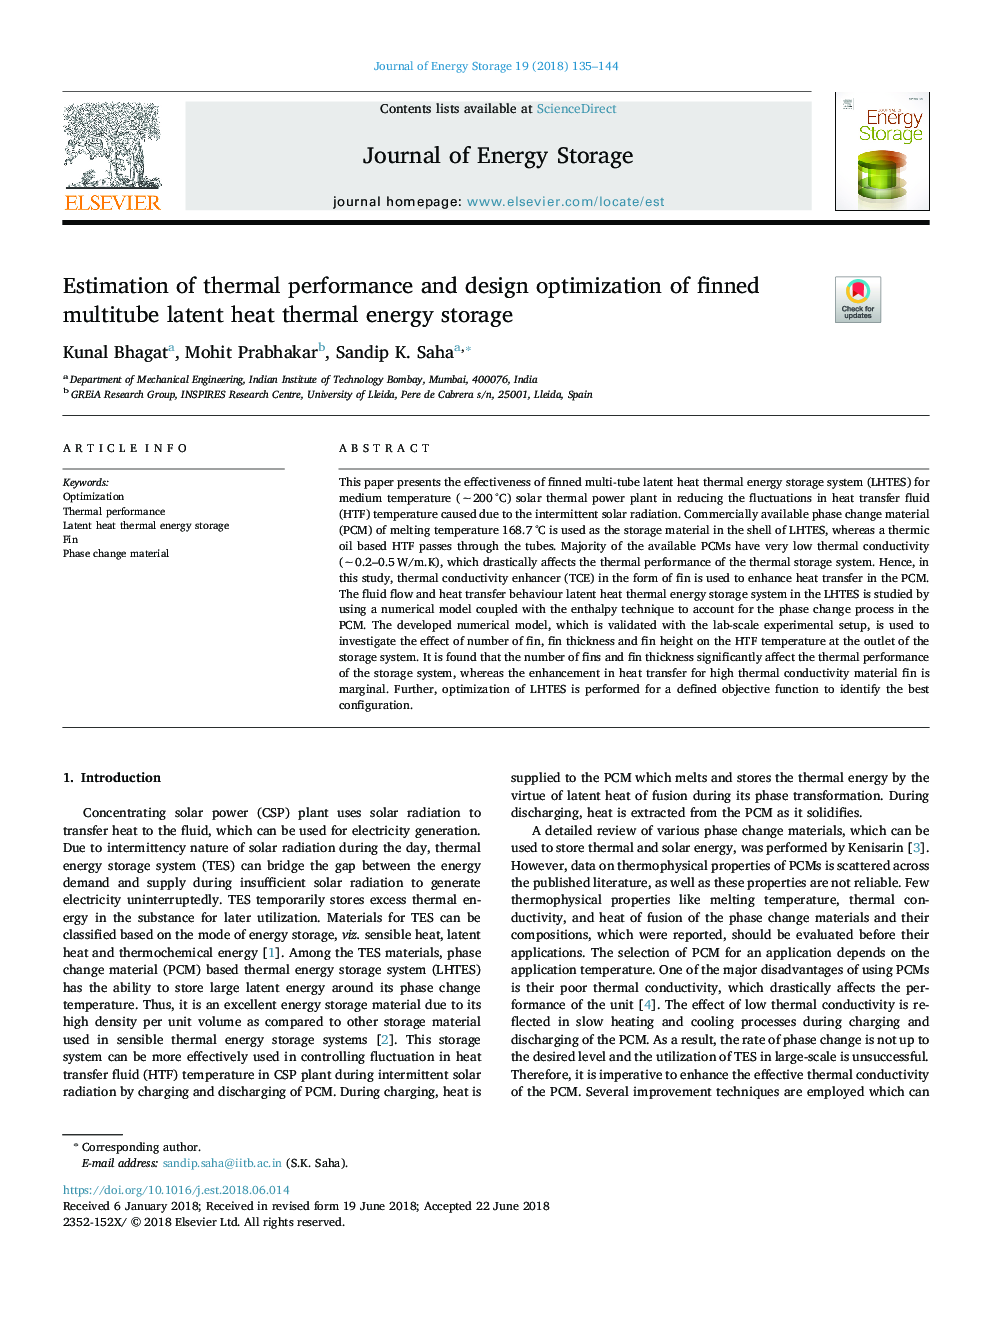 Estimation of thermal performance and design optimization of finned multitube latent heat thermal energy storage